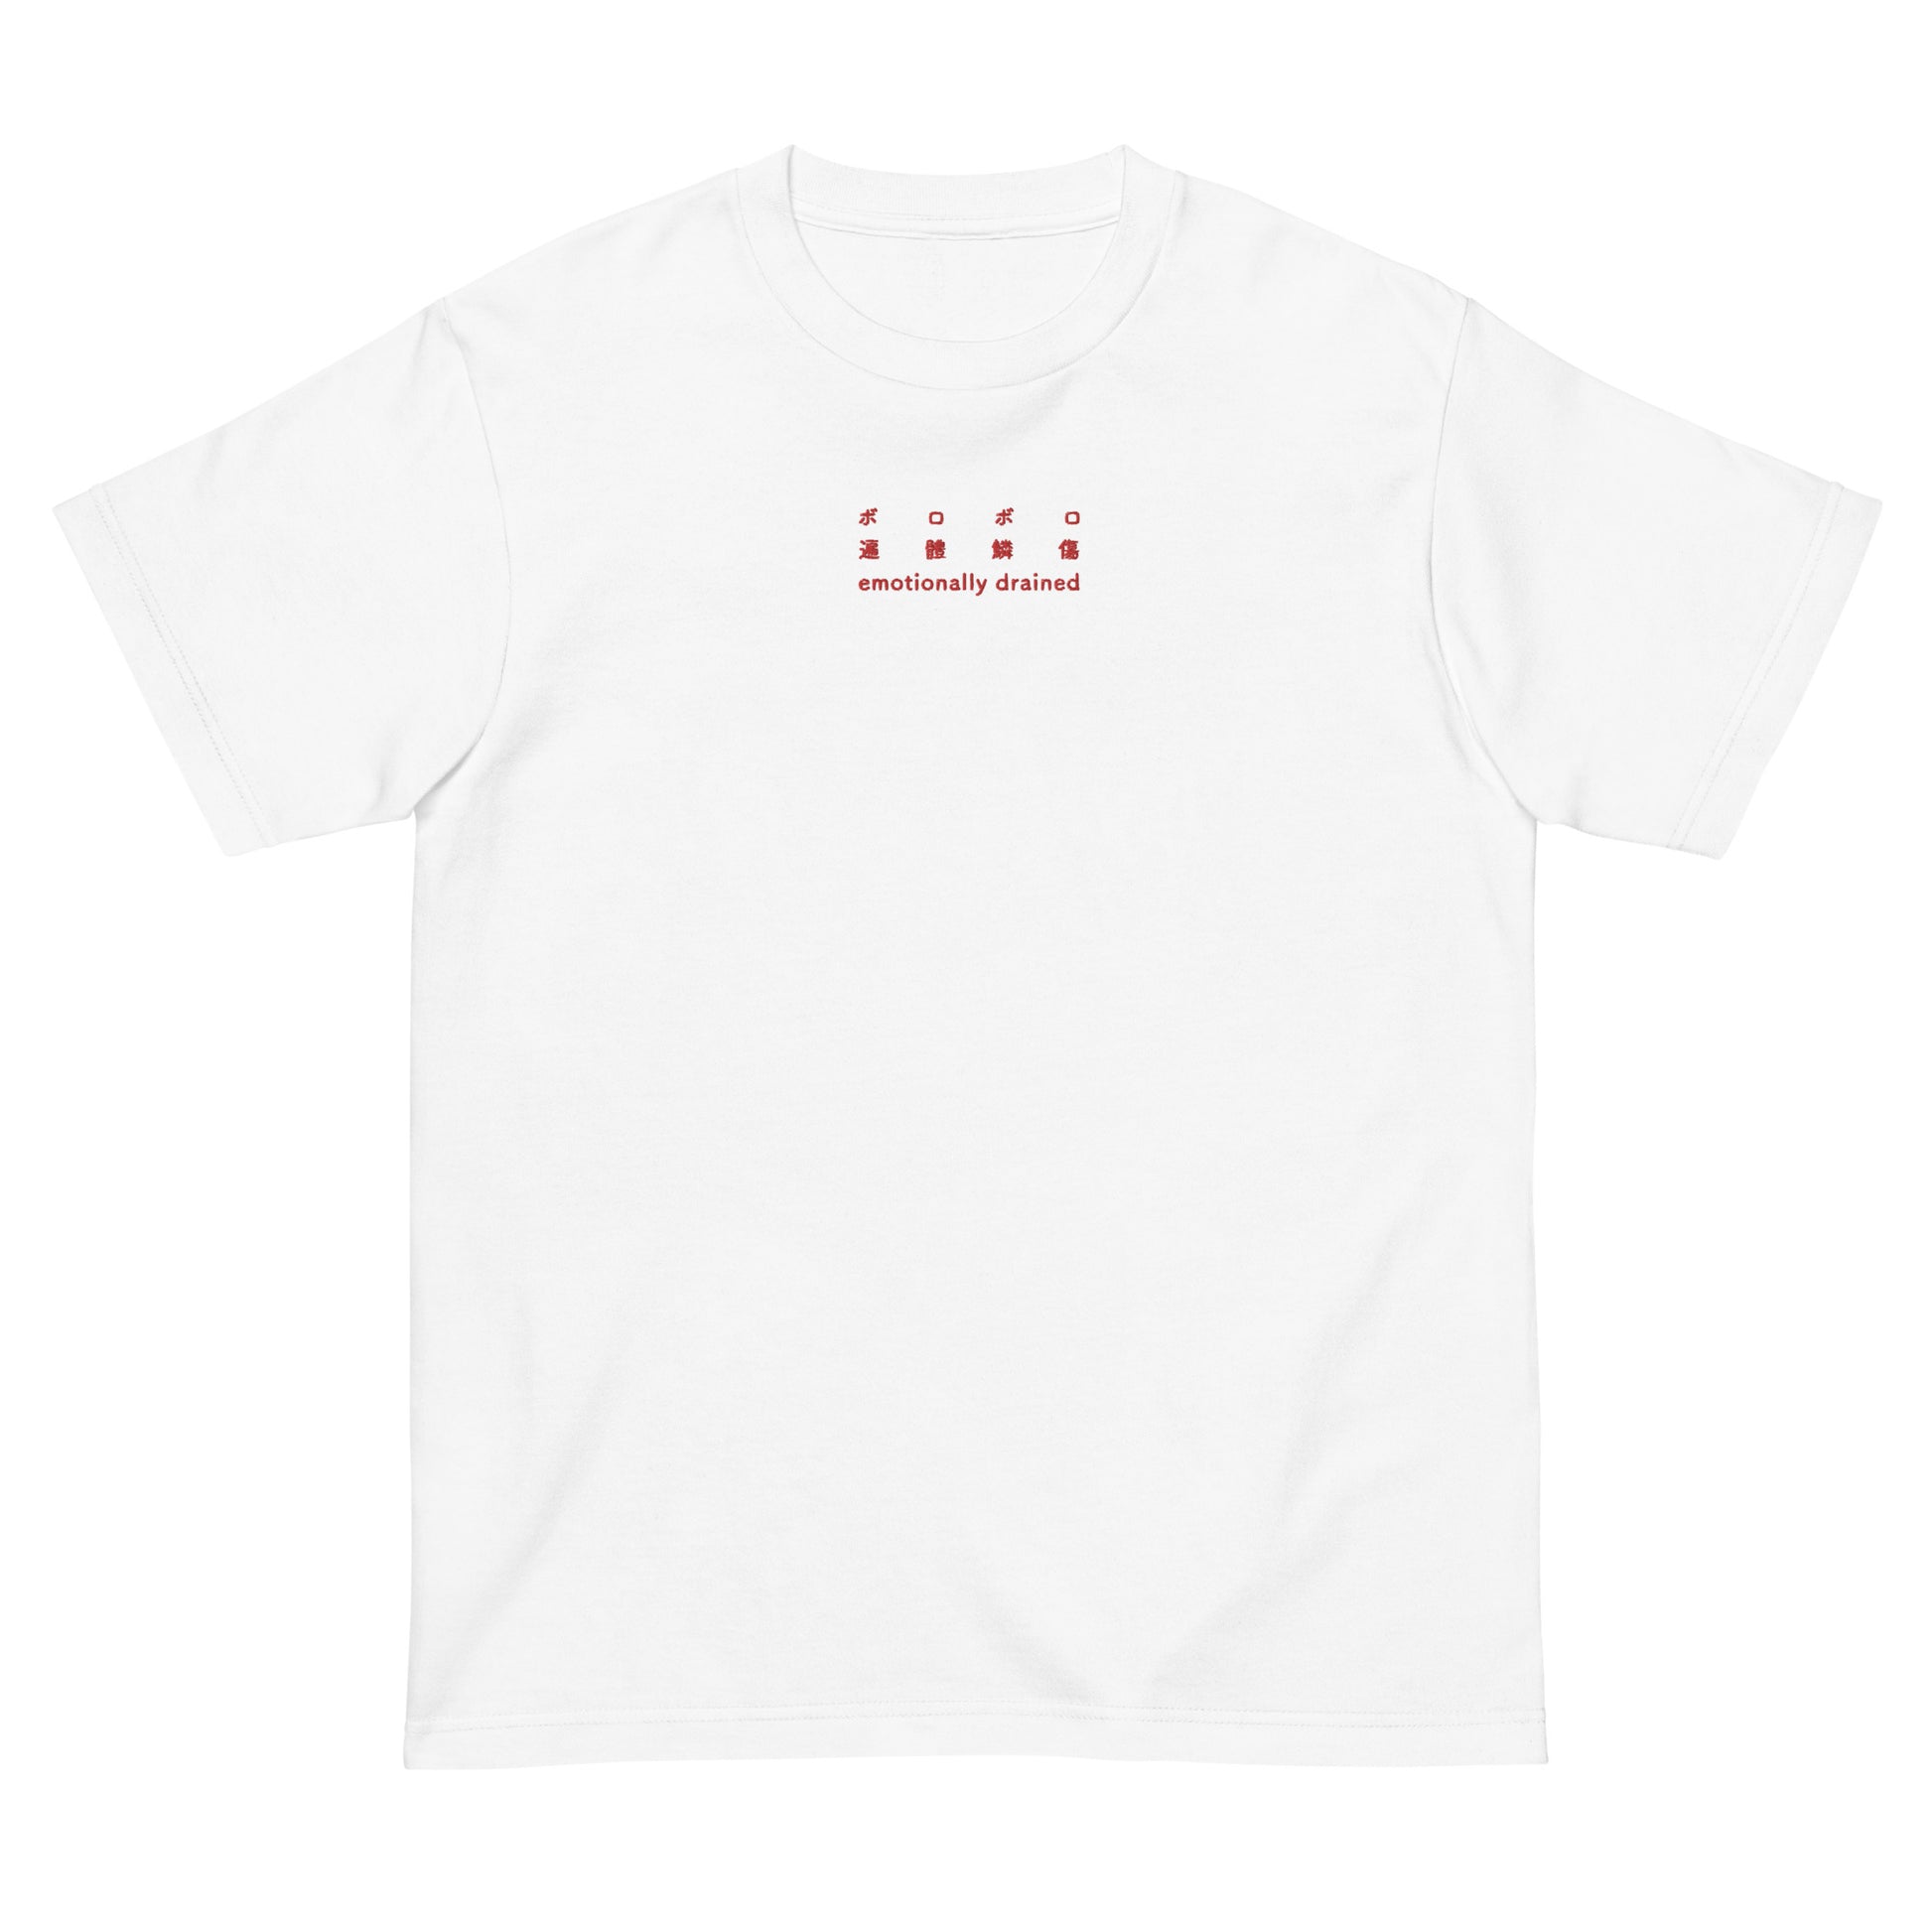 White High Quality Tee - Front Design with an Red Embroidery "emotionally drained" in three languages